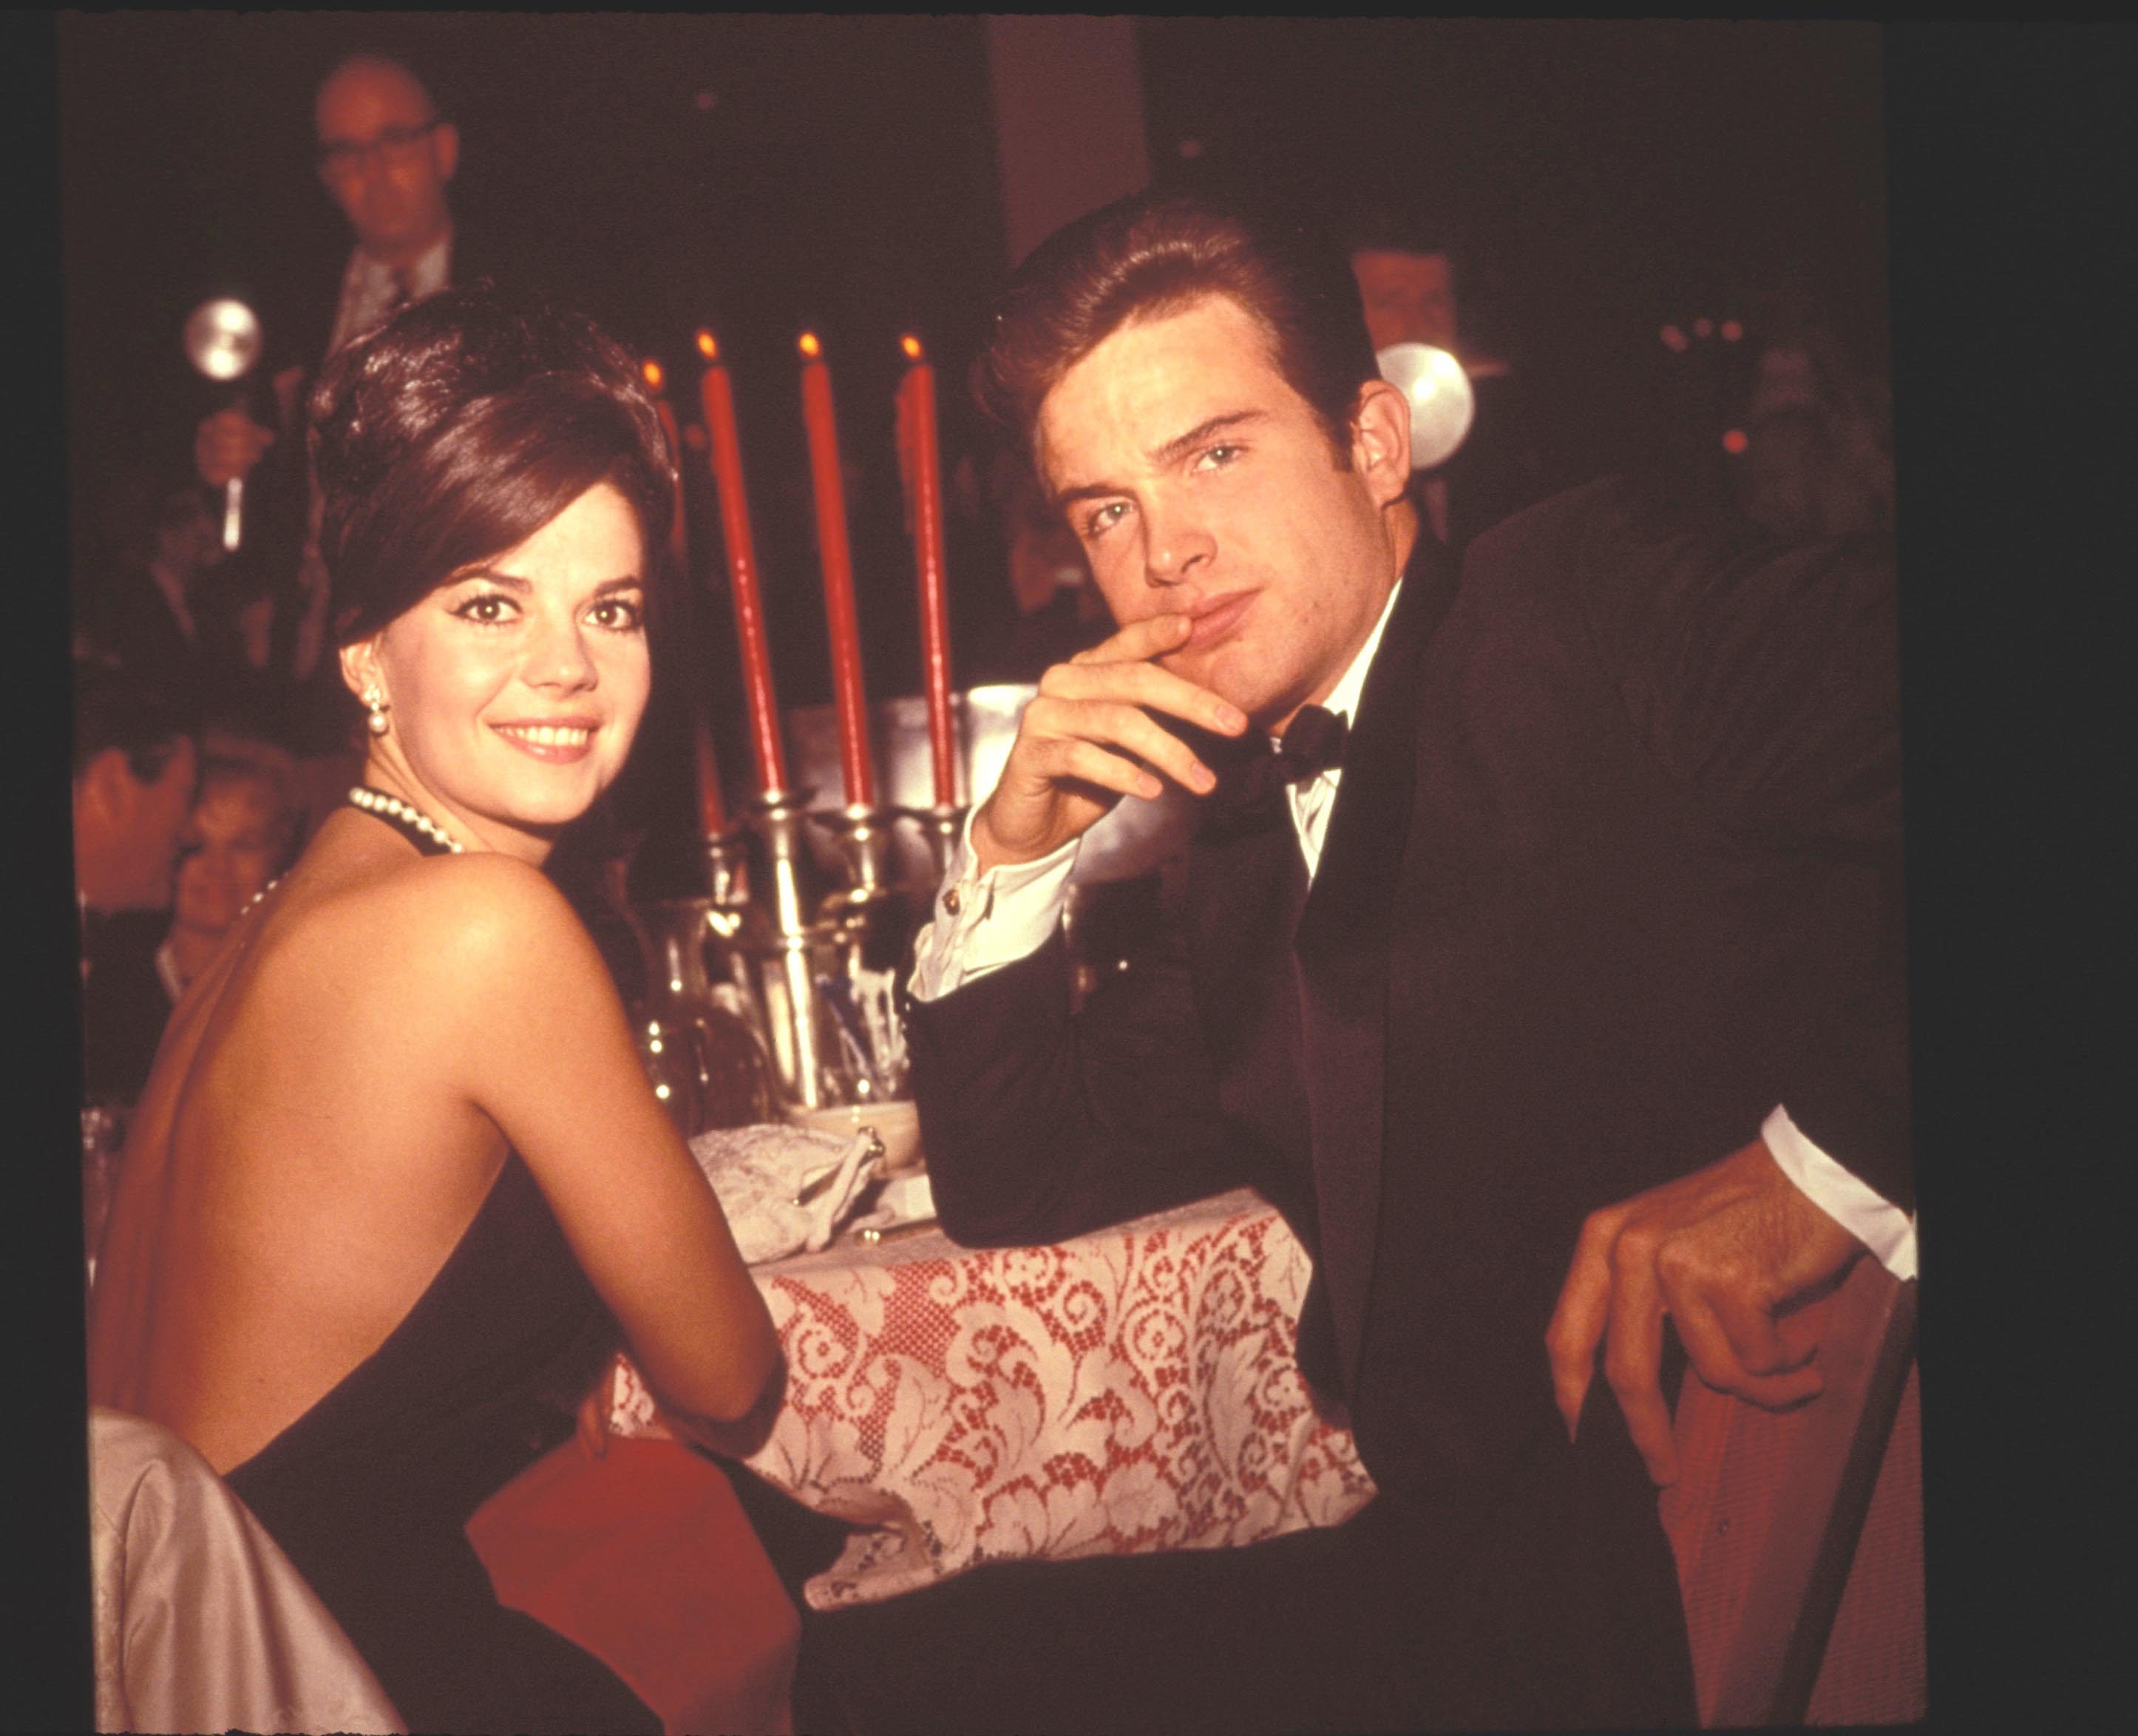 With actress Natalie Wood, at the